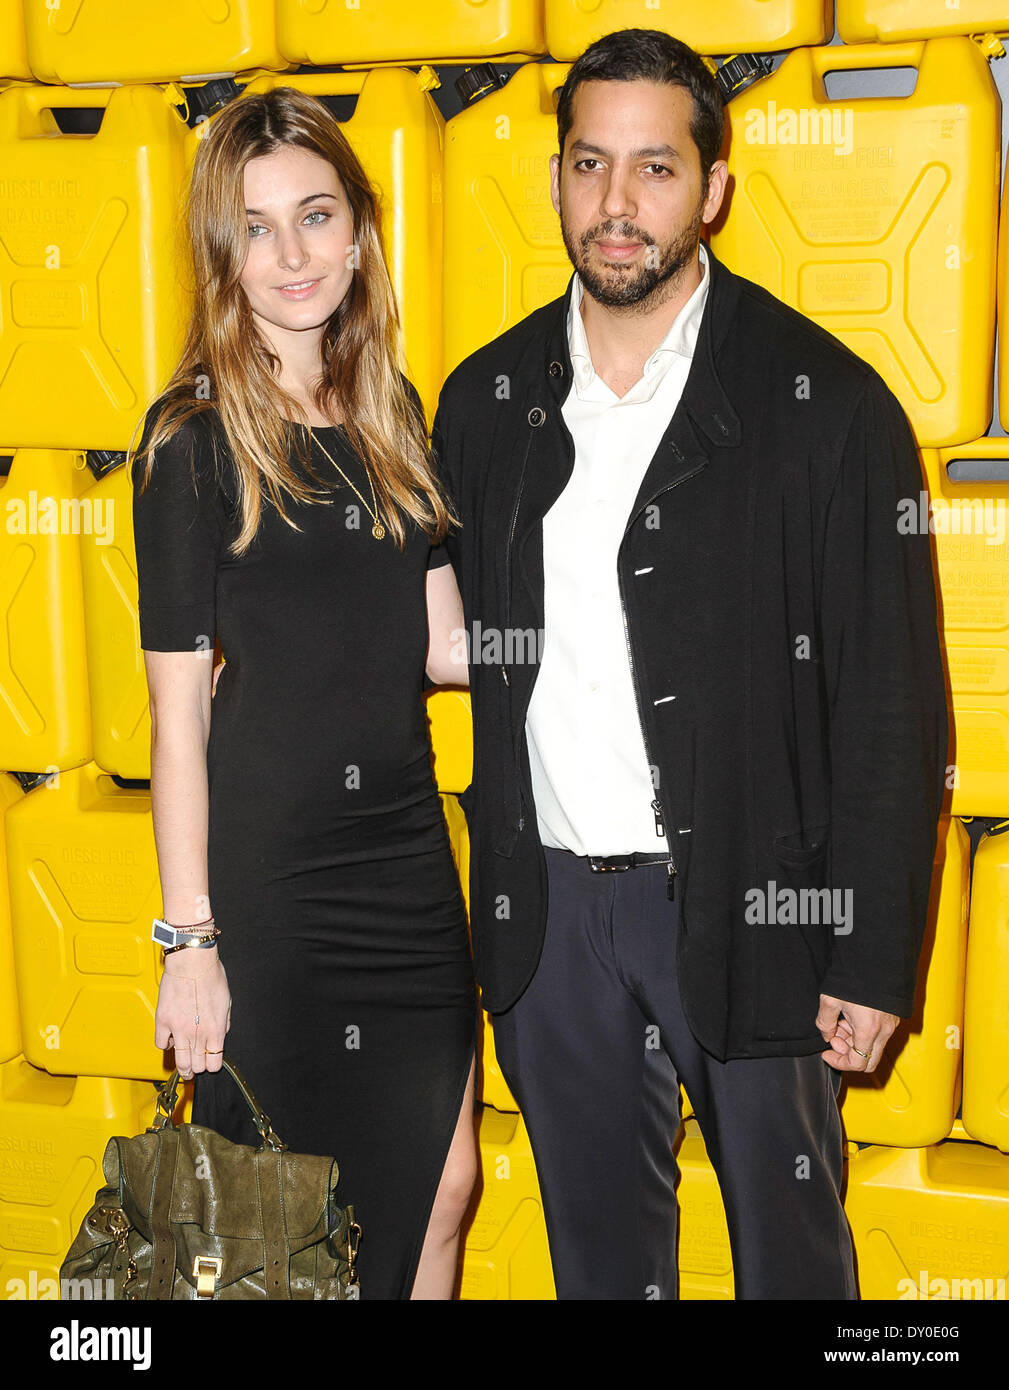 7th Annual Charity Ball benefiting Charity:Water - Arrivals Featuring: David Blaine,Alizee Guinochet Where: New York United States When: 10 Dec 2012 Stock Photo